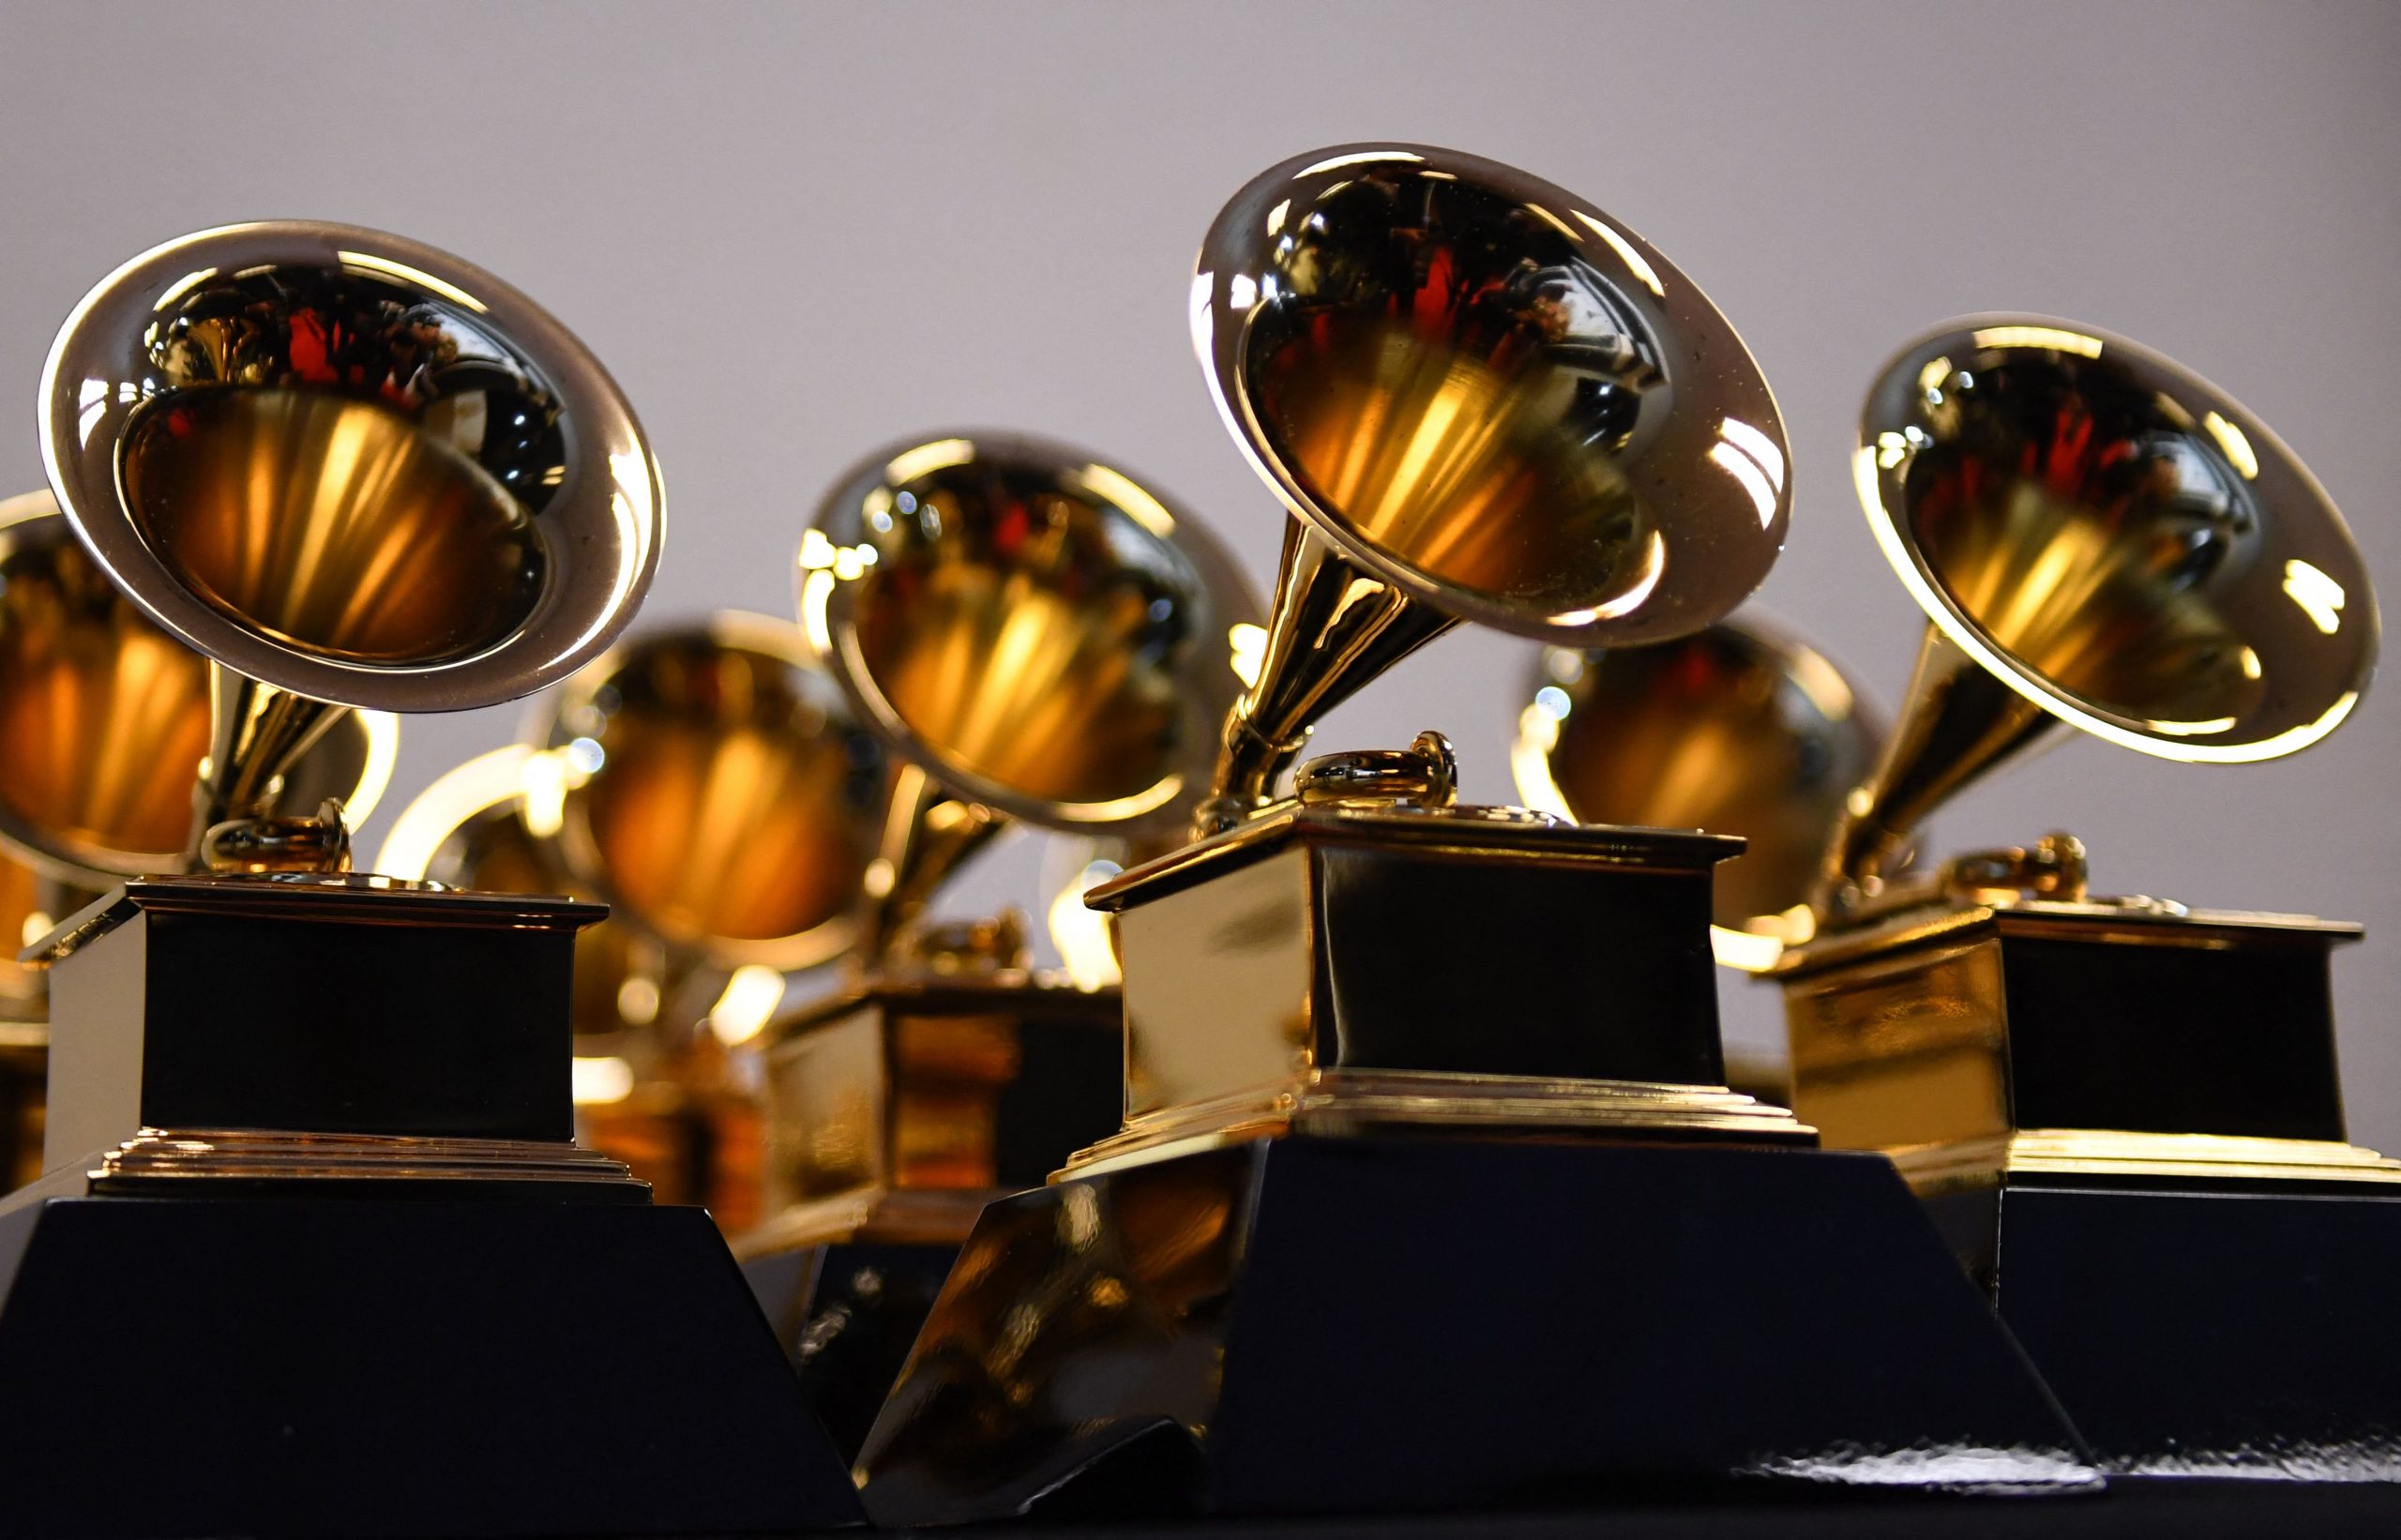 The 2022 Grammys Has More Controversy Than the Oscars